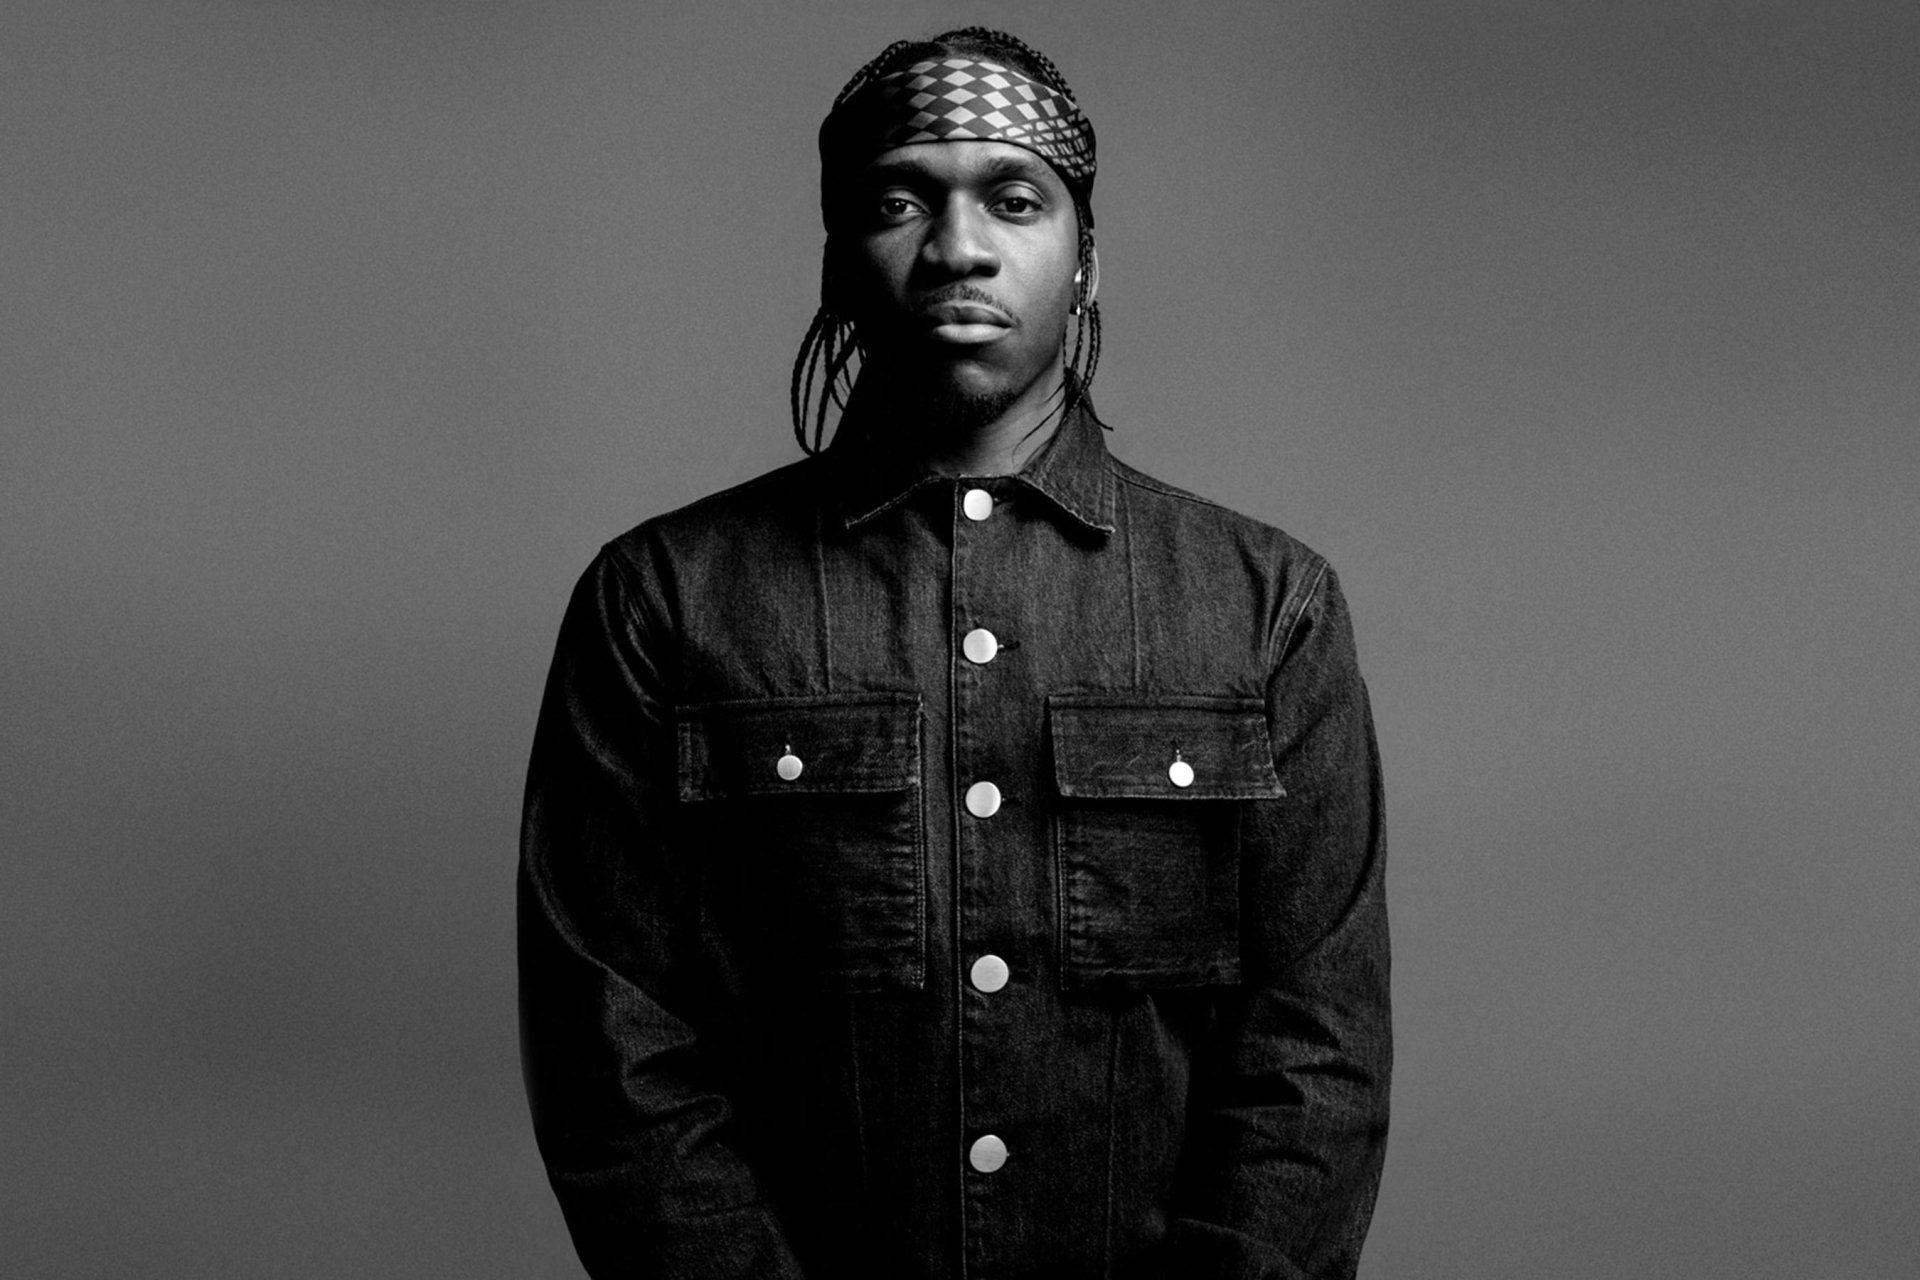 Pusha T Wallpapers - Top Free Pusha T Backgrounds 1920x1280